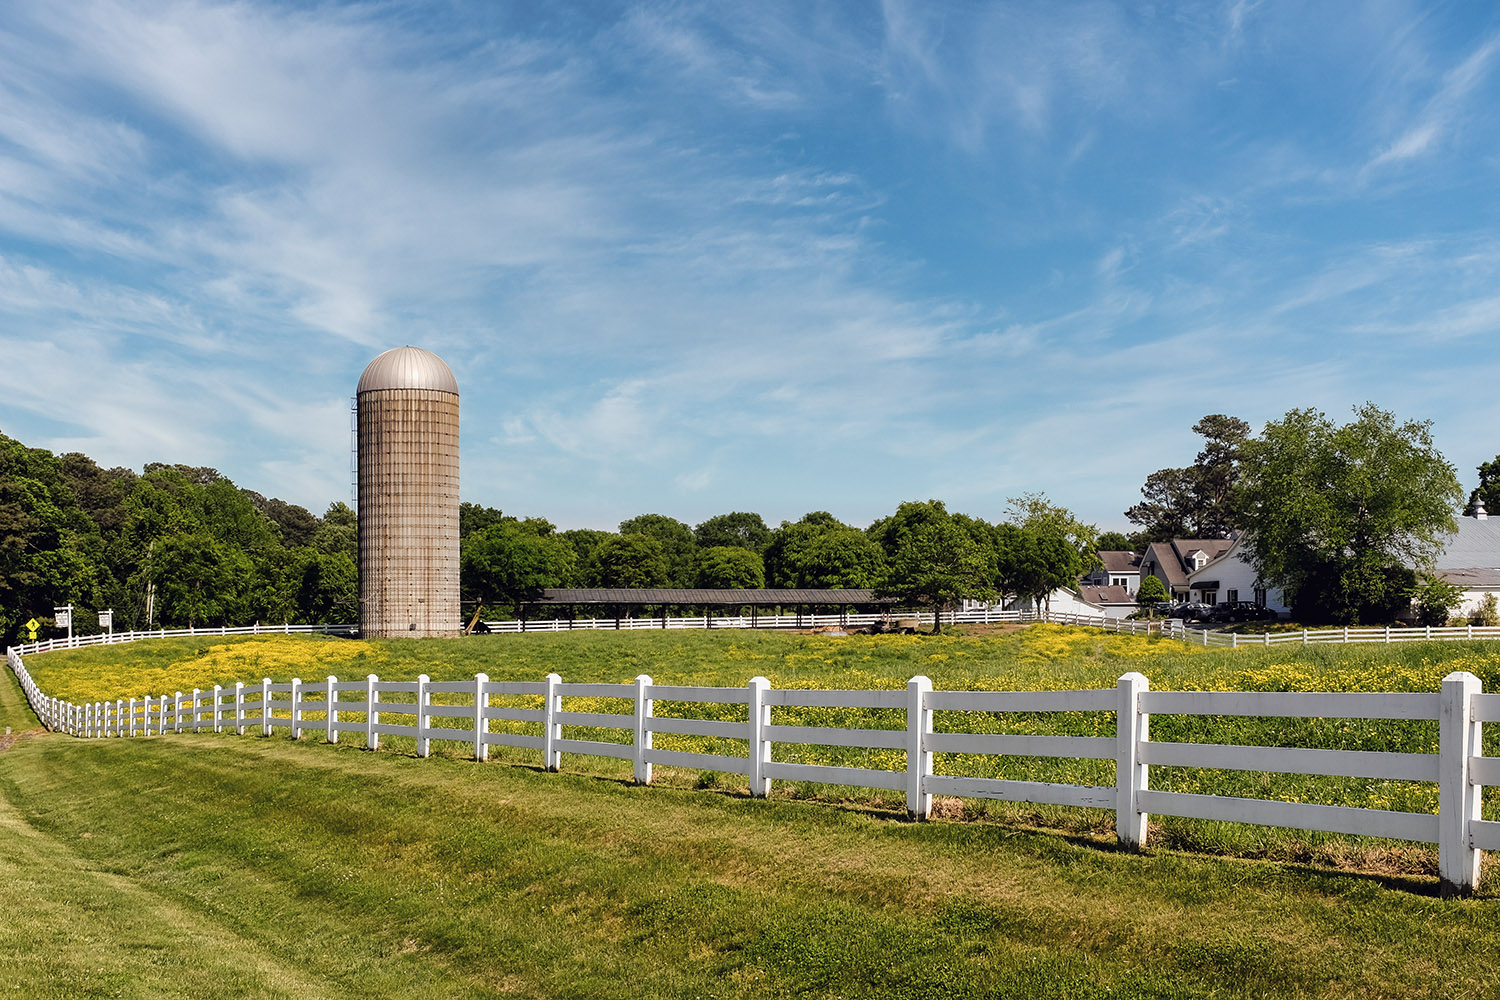 An iconic view of Fearrington Village: the big pasture, the white fence, and the silo